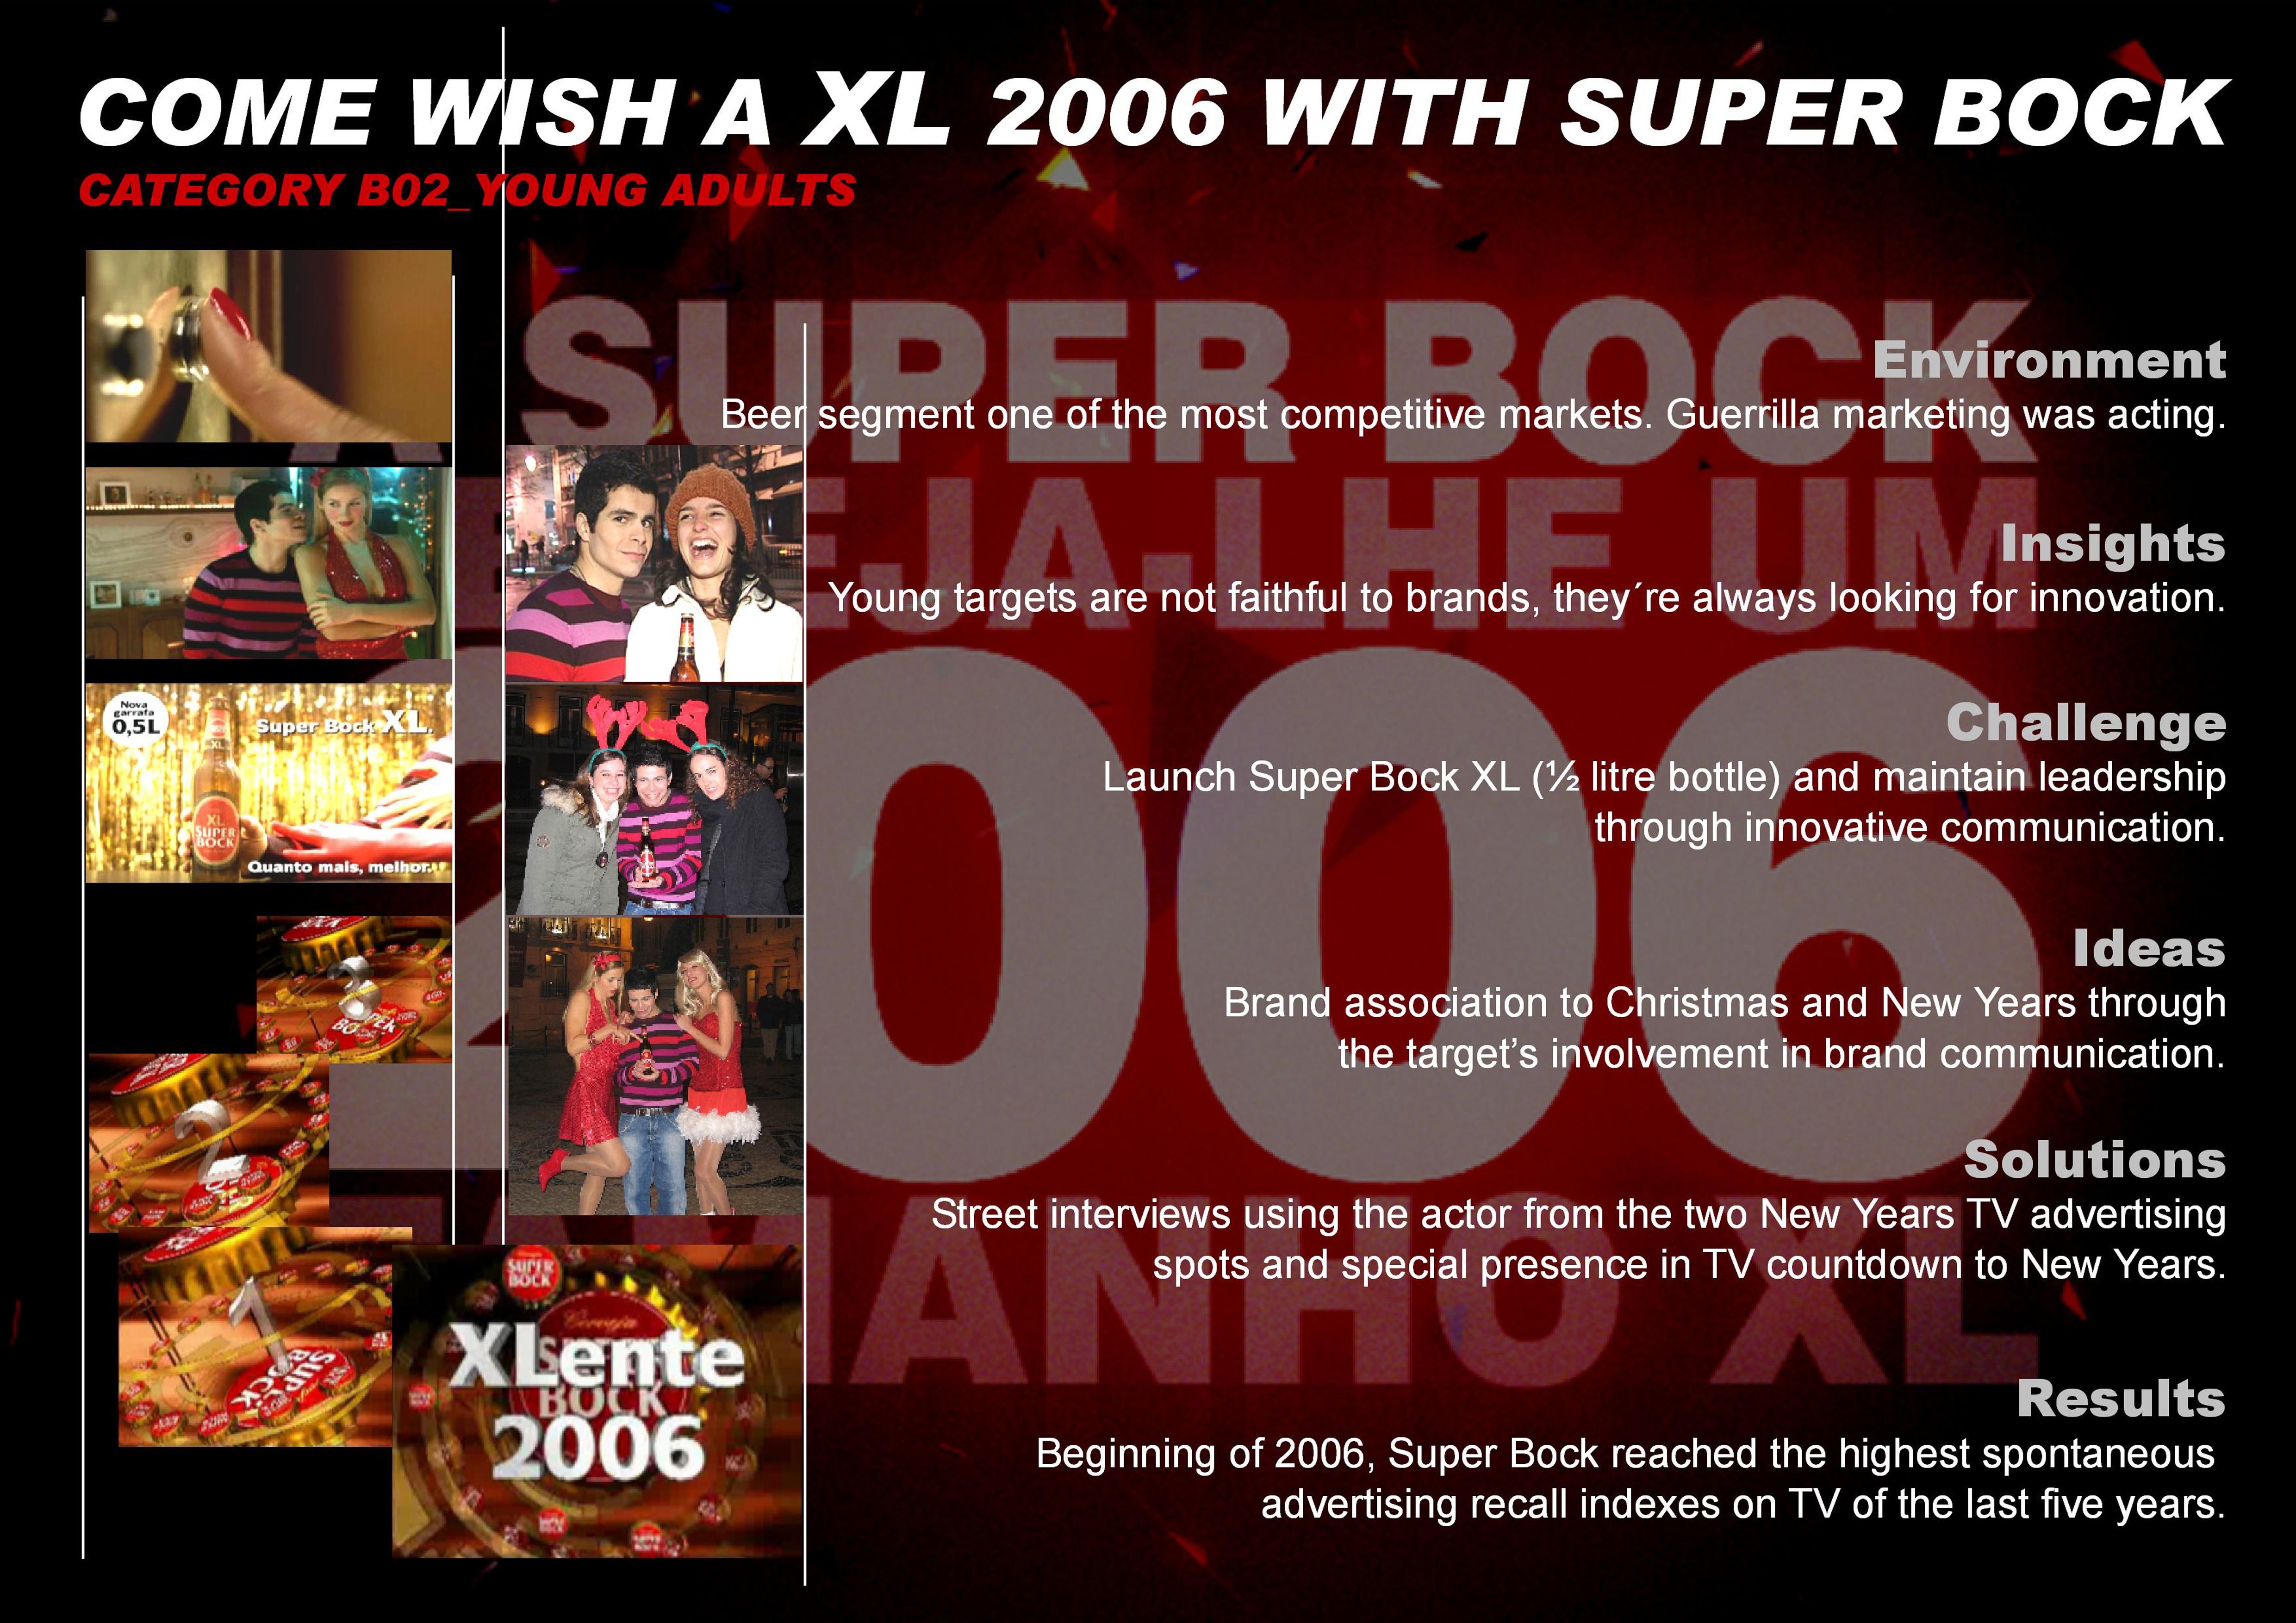 2006 WITH SUPER BOCK